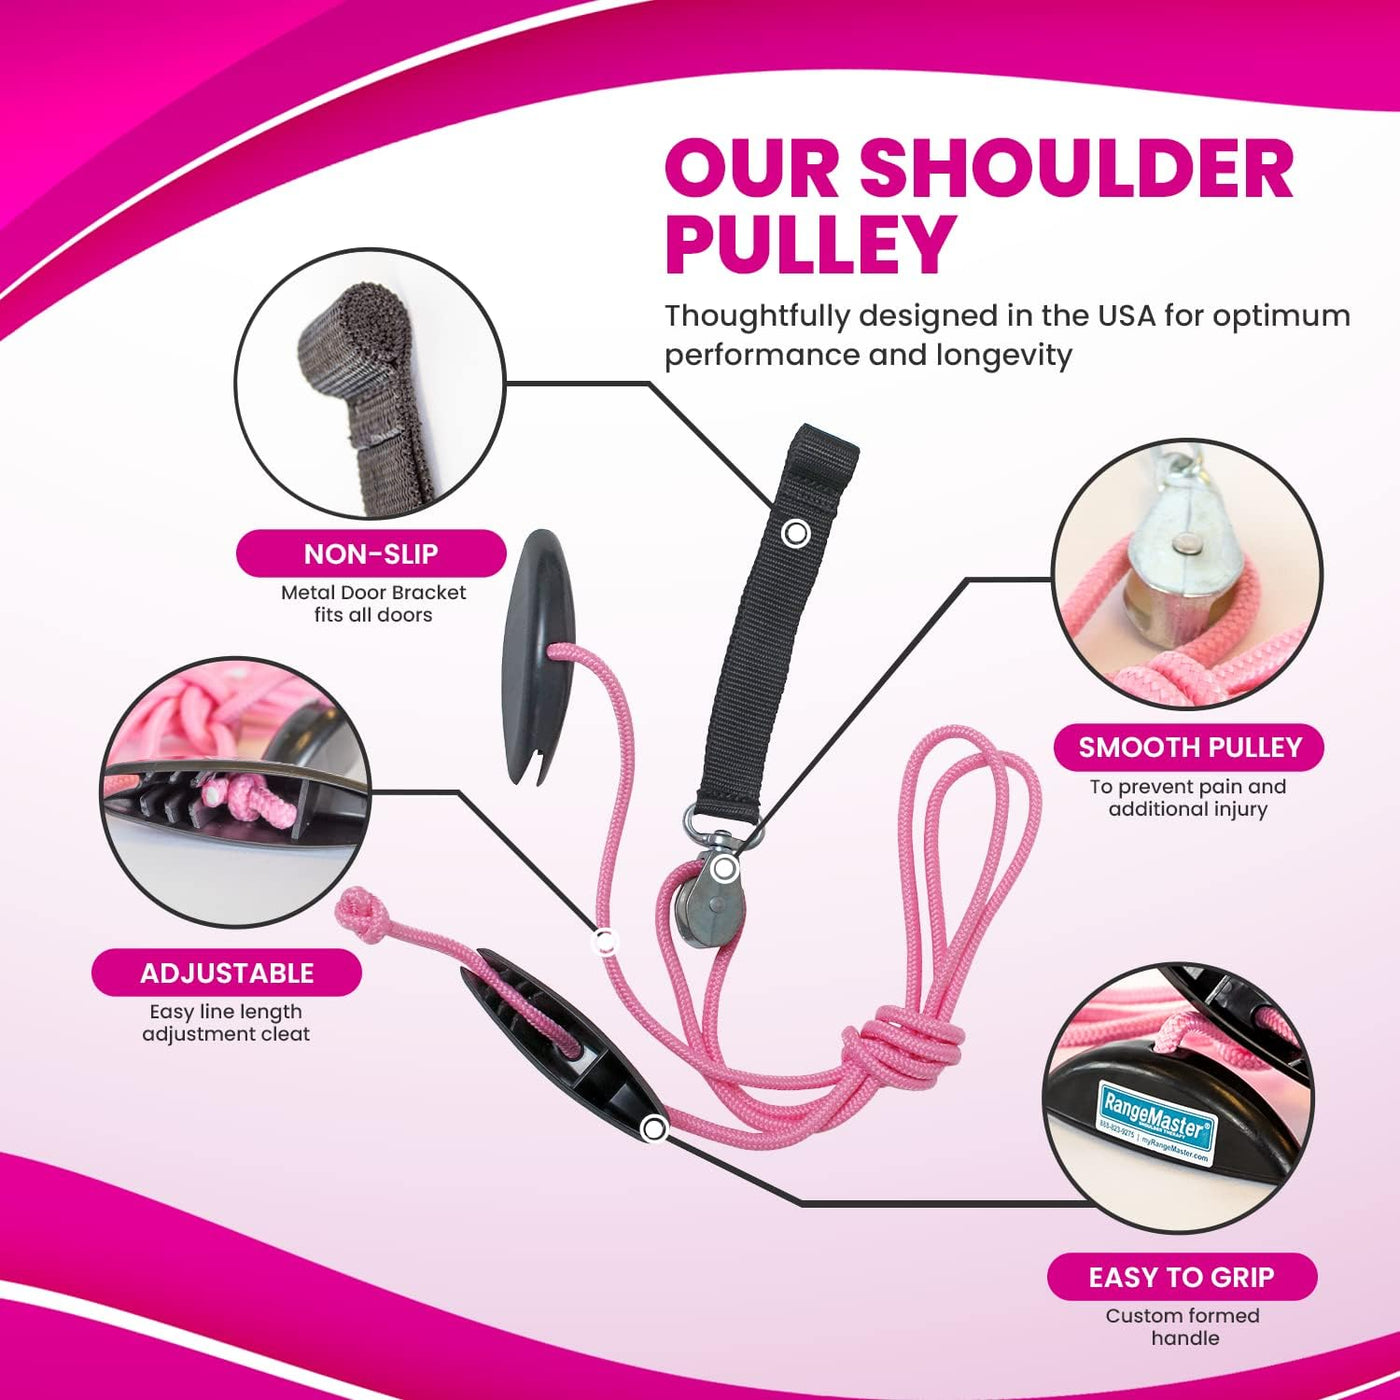 Rangemaster Pinkranger Shoulder Pulley with Patient Guide Aids Recovery